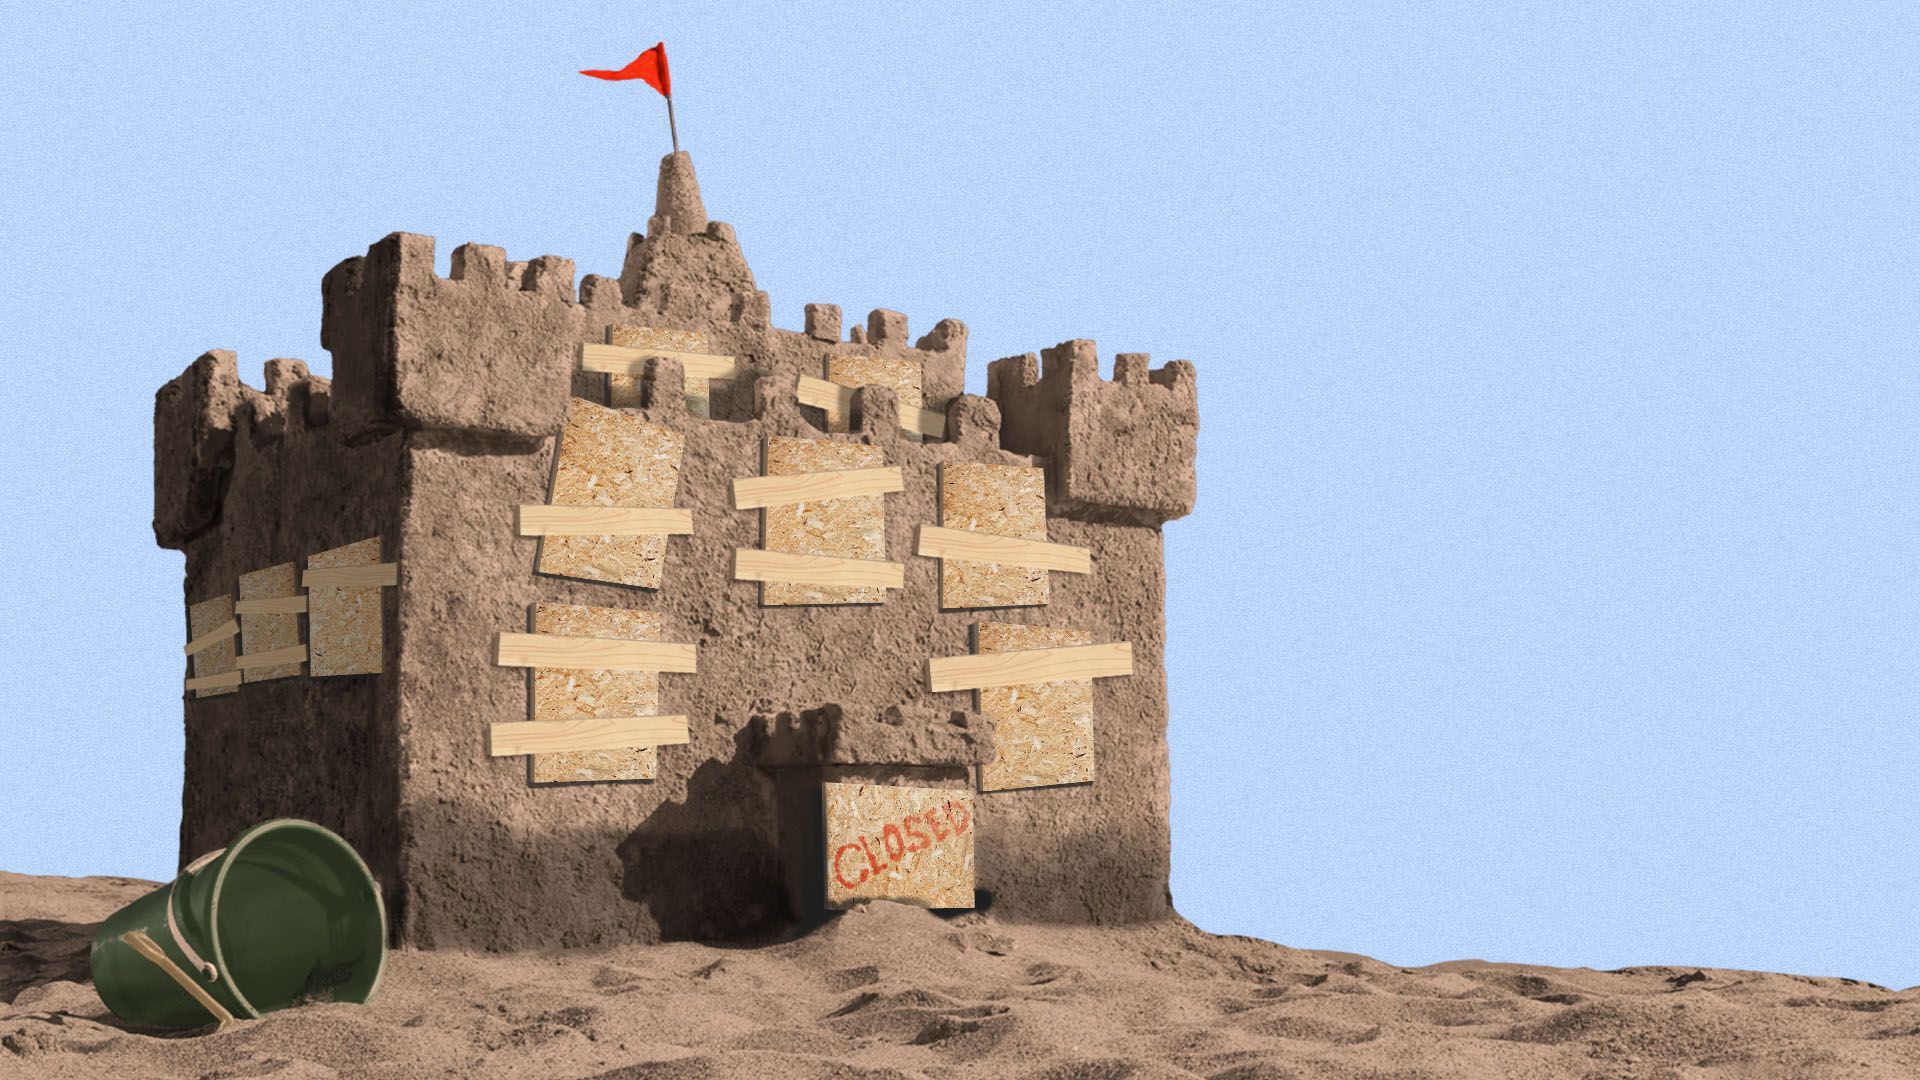 Illustration of a boarded up sandcastle